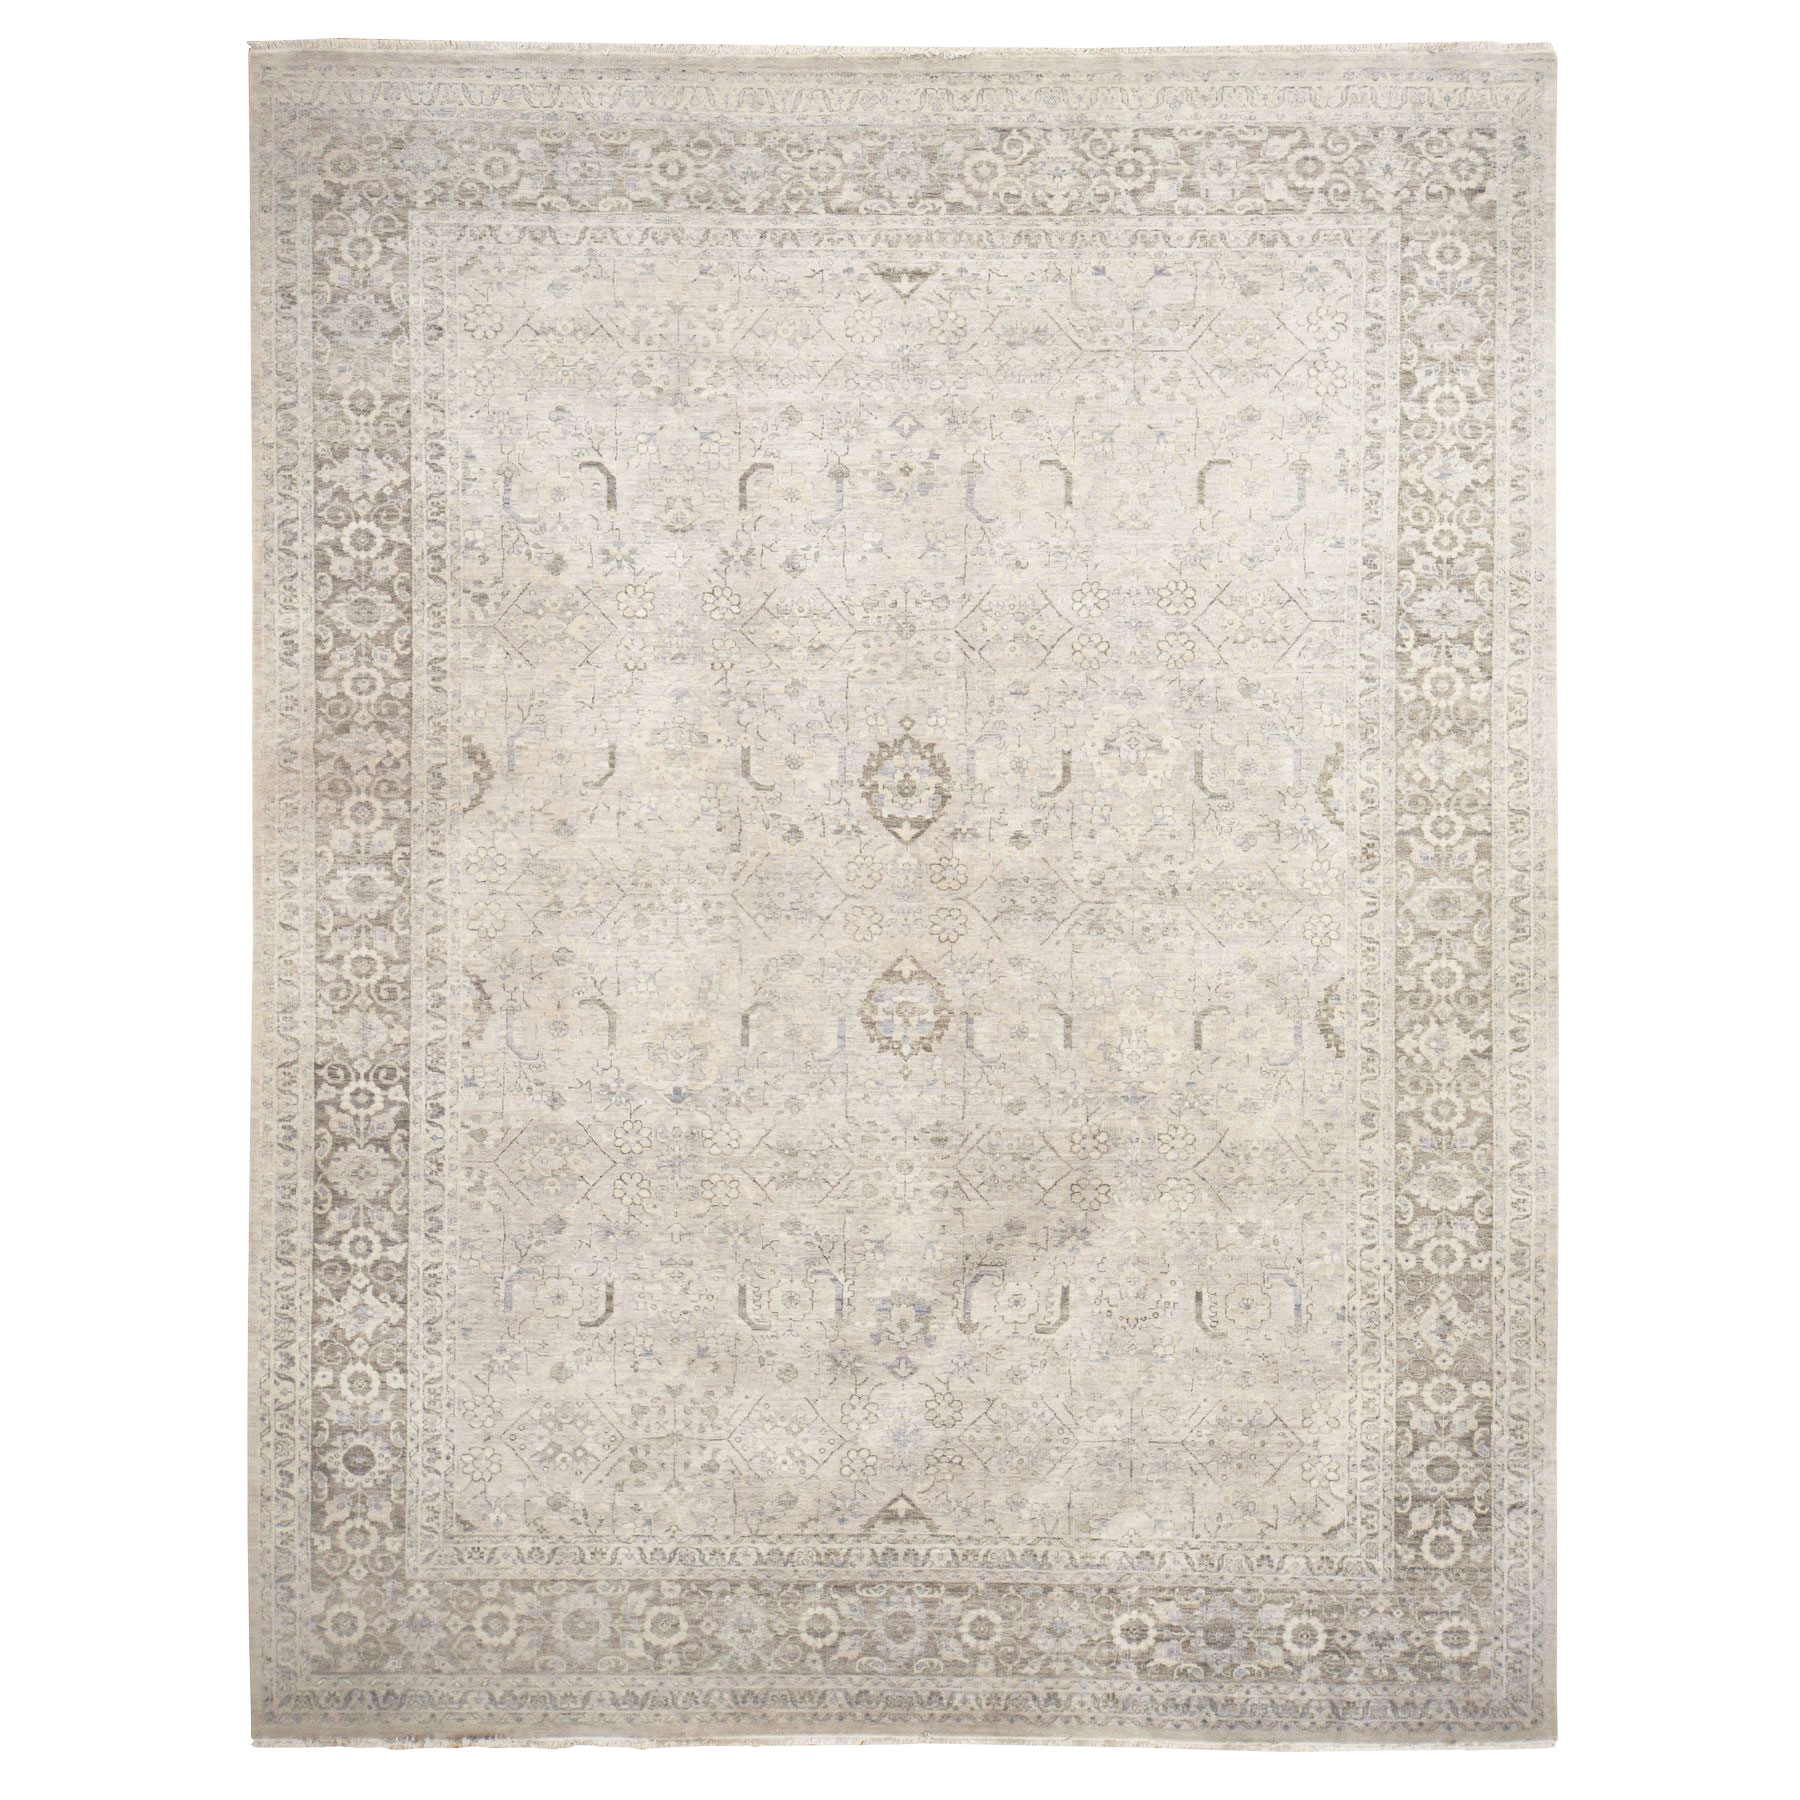 Chateau Gray, Hand Knotted, 100% Wool, Distressed, Persian Sultanabad Influence, Broken and Erased, Pile Cropped Low, Oriental 